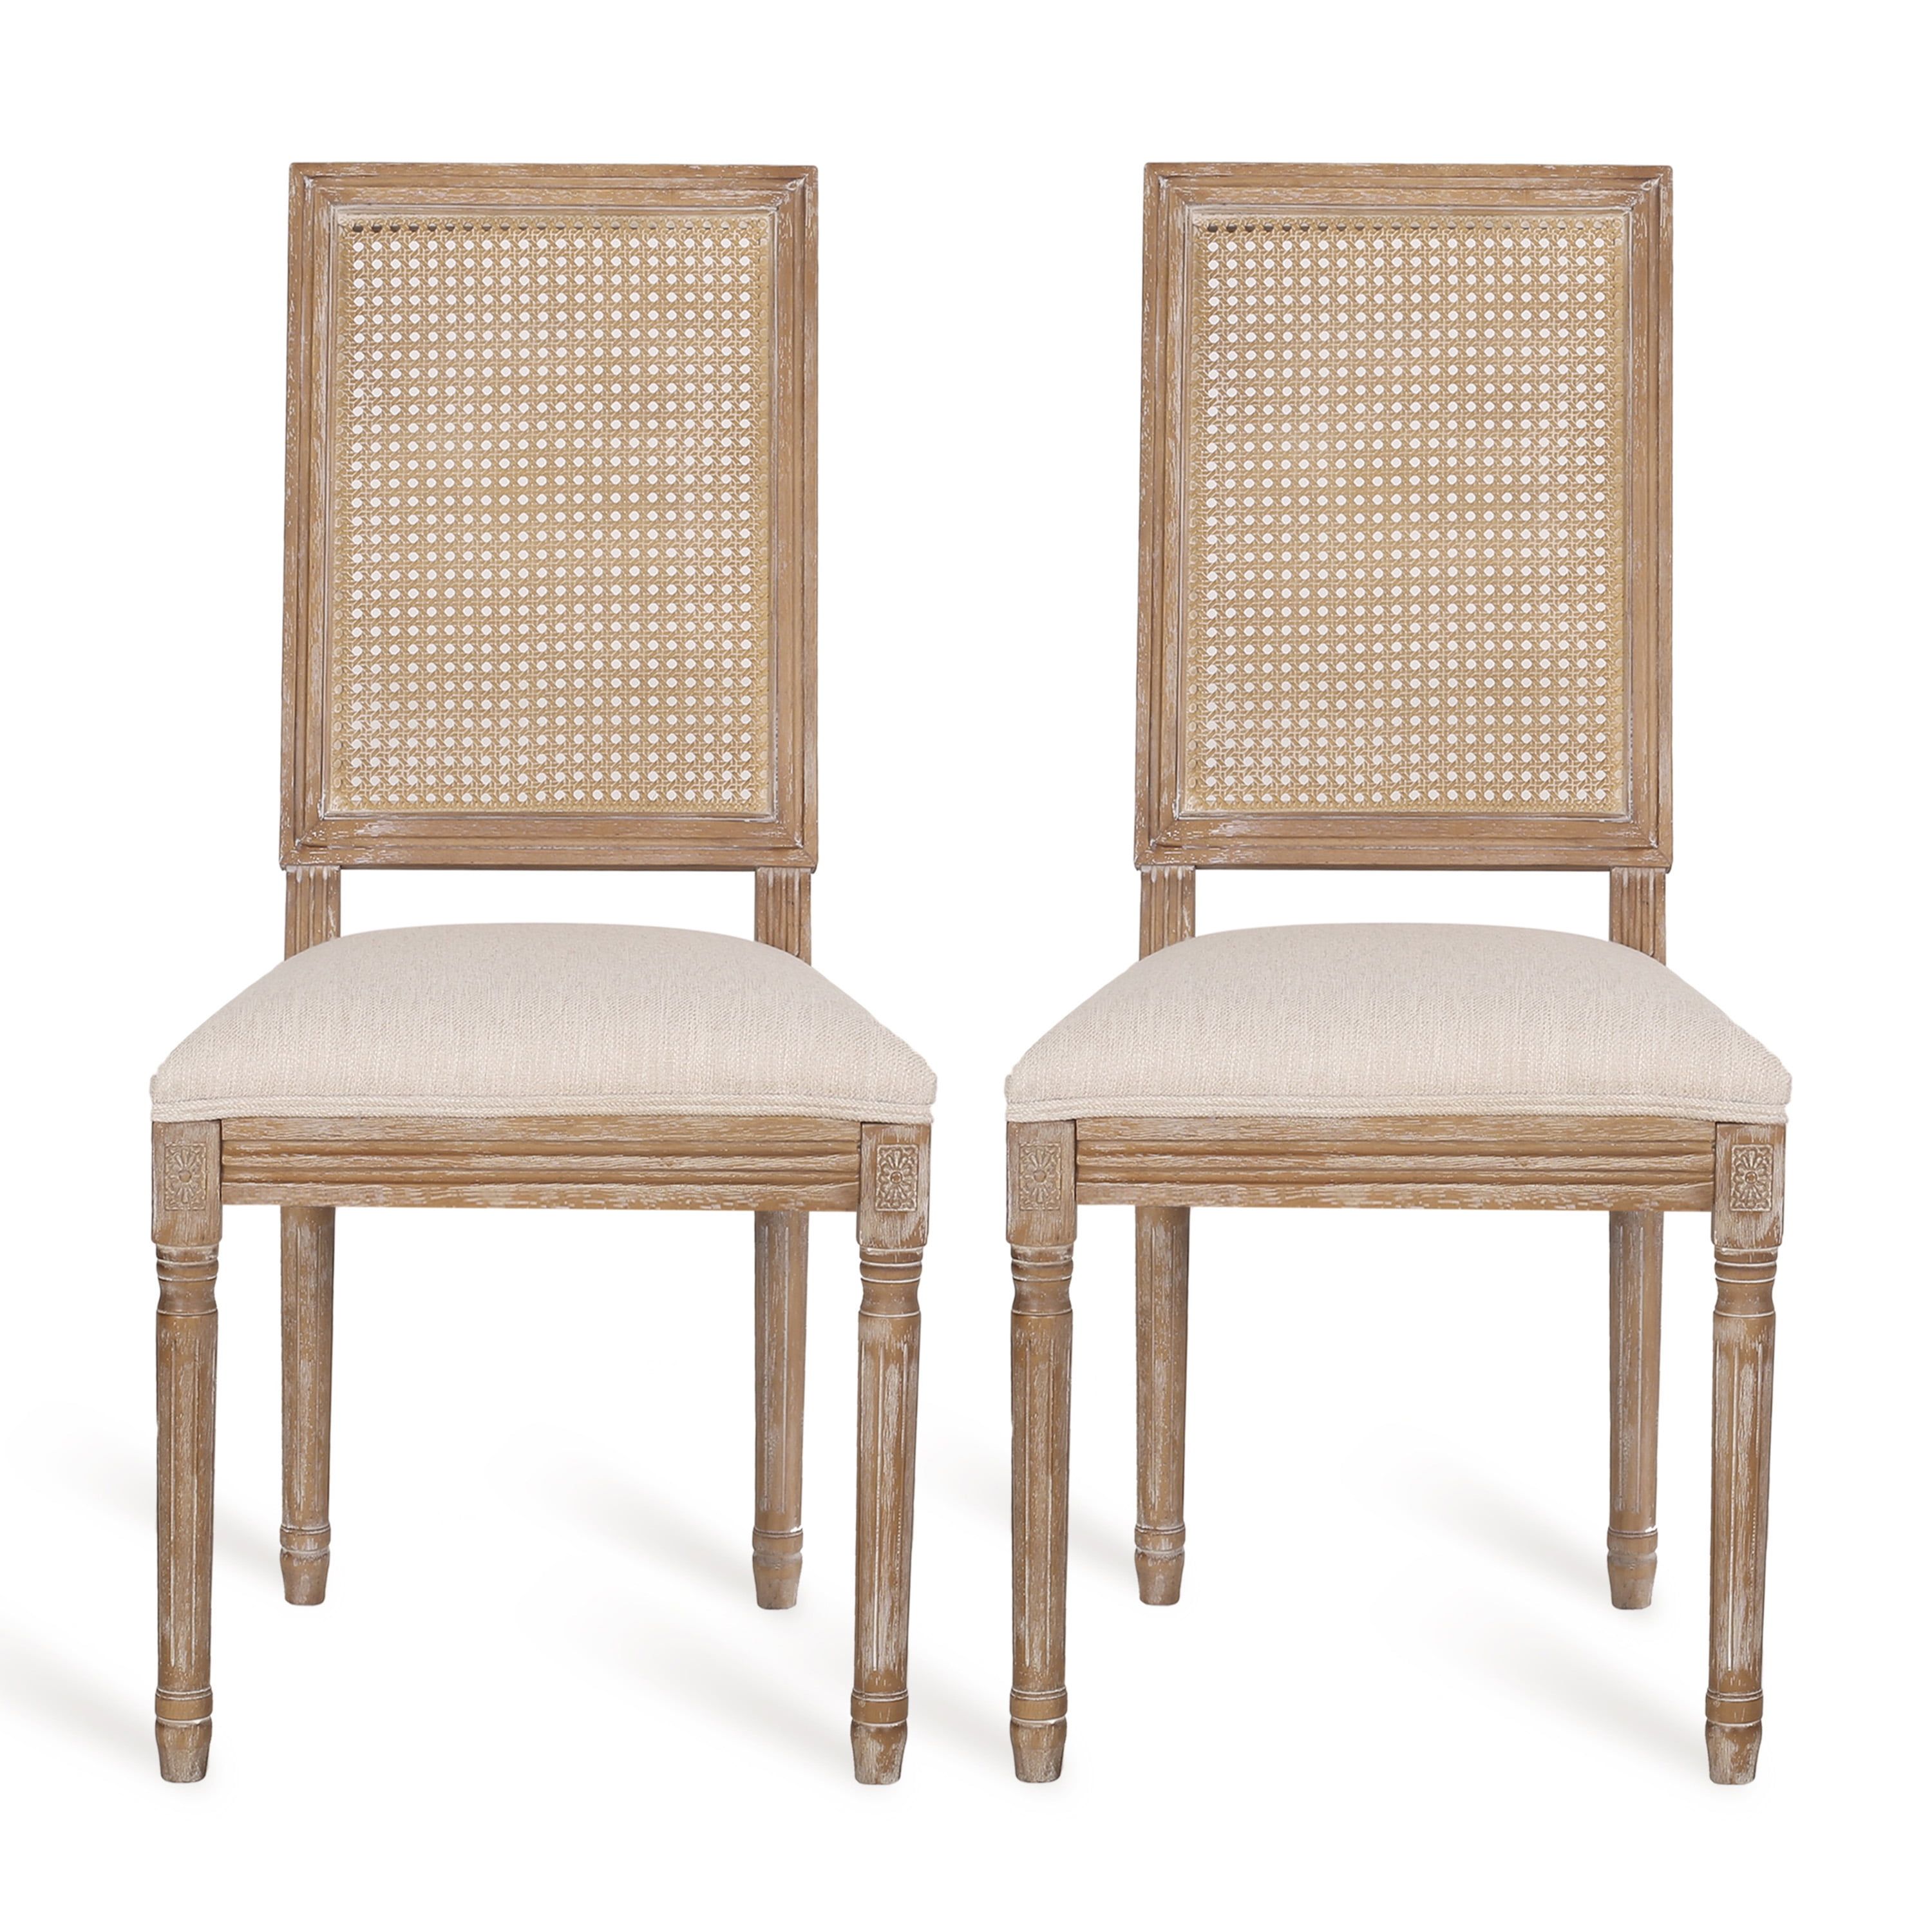 Elegant Beige Parsons Side Chair with Cane Backrest and Fluted Legs, Set of 2